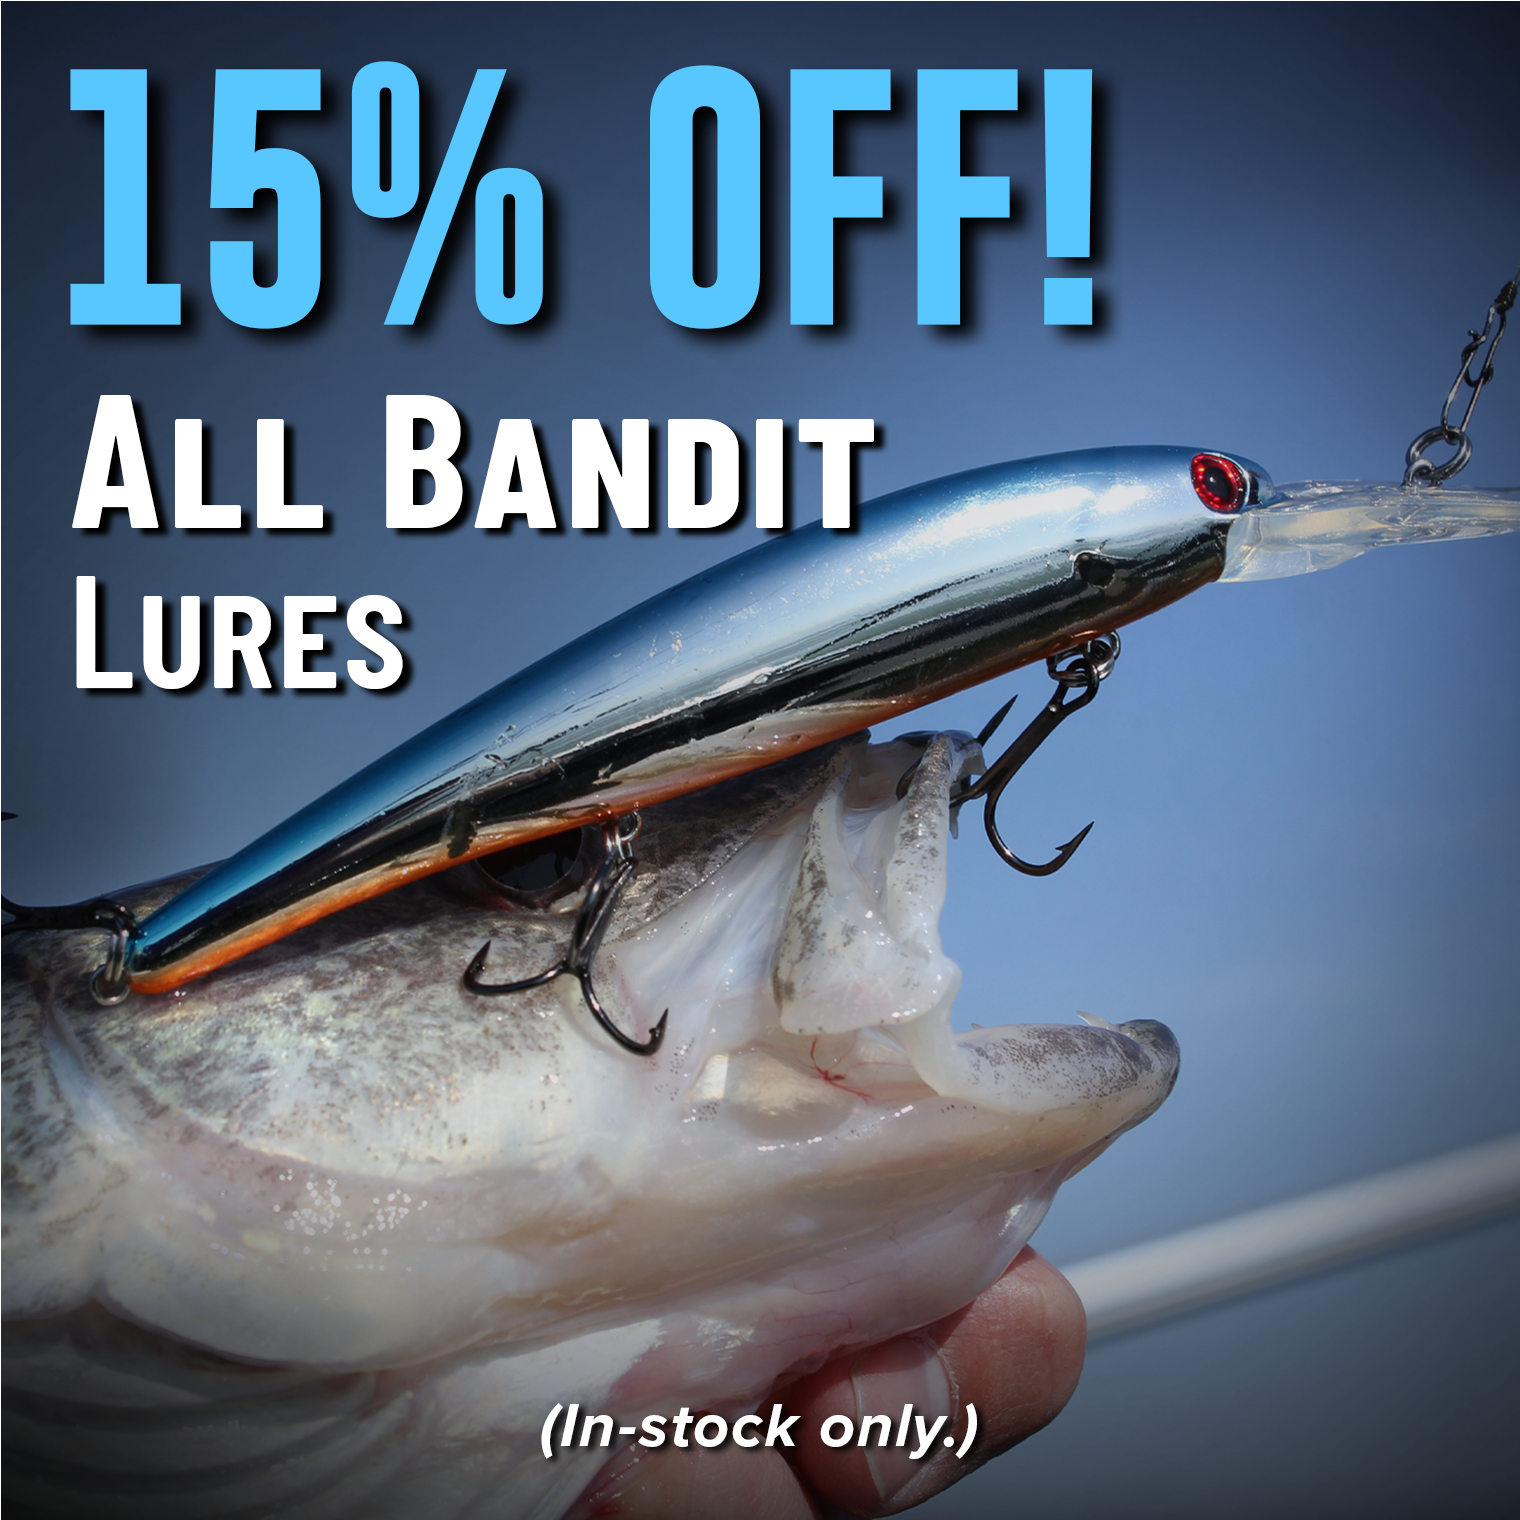 15% Off! All Bandit Lures (In-stock only.)